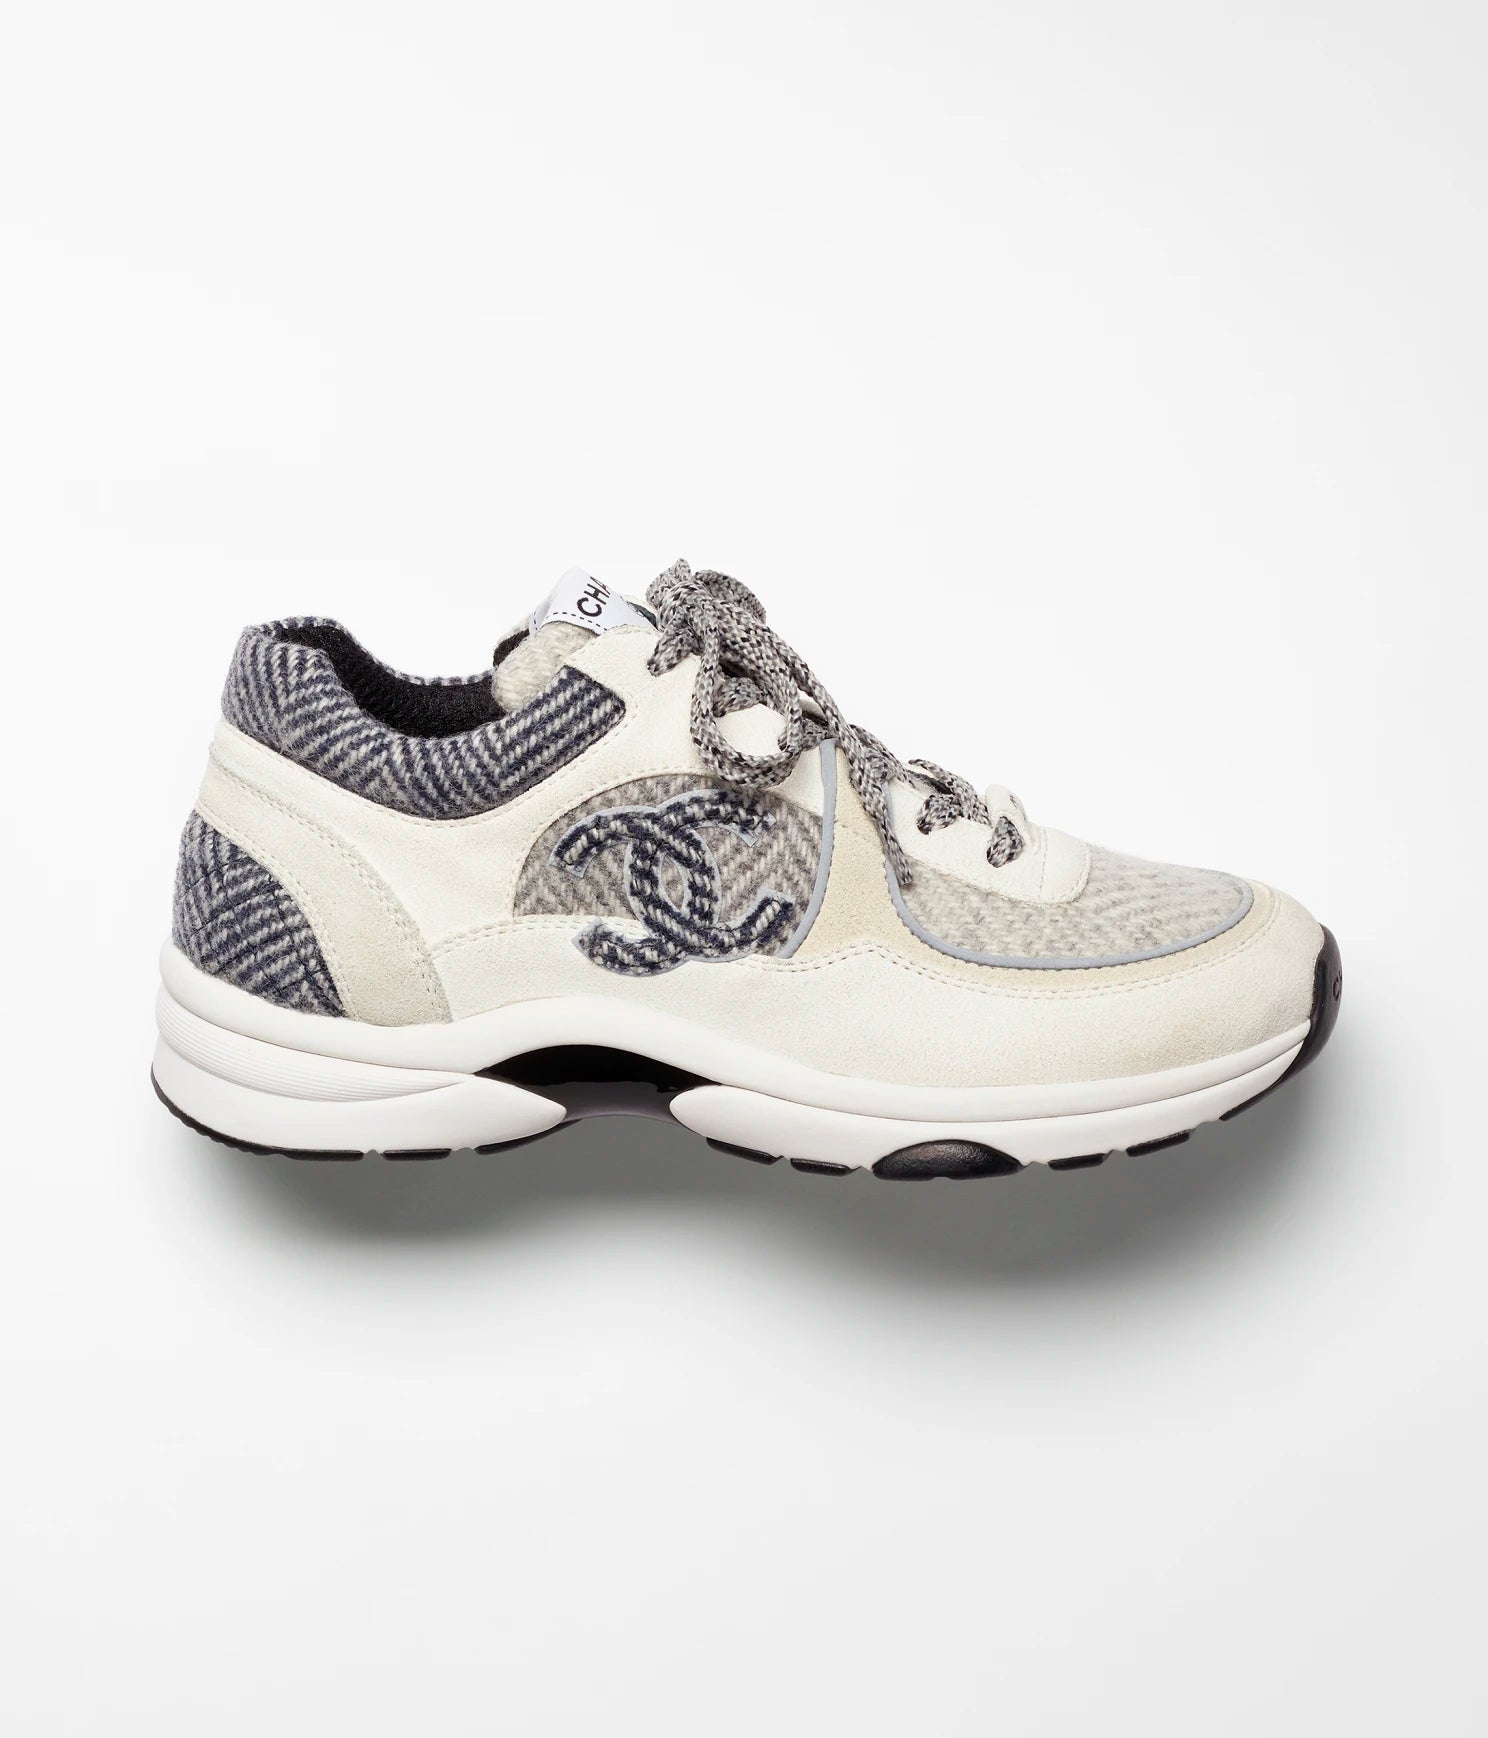 Chanel Chanel Trainers Calfskin Ivory, Light Gray & White